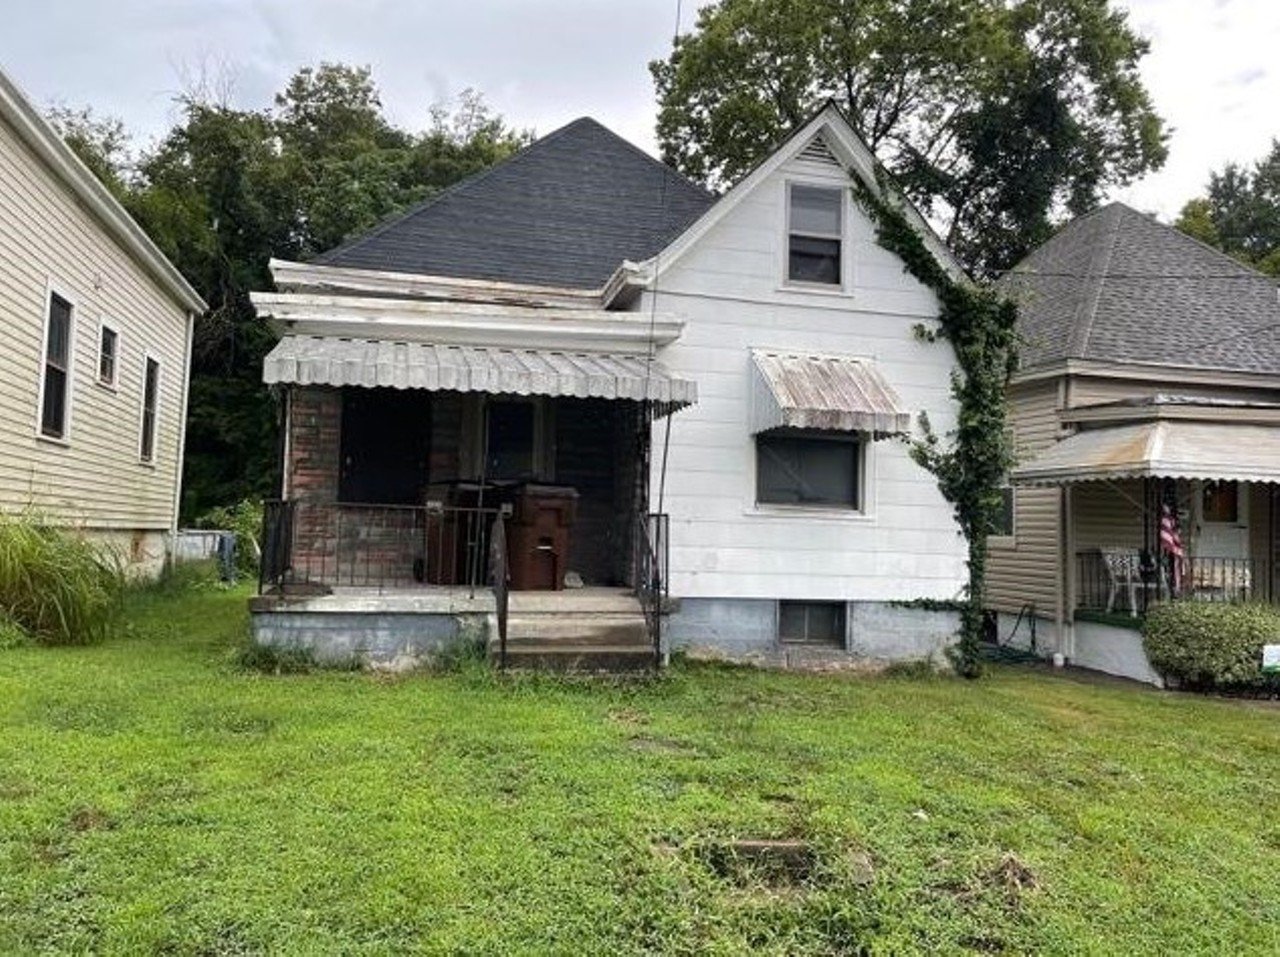 ​​213 Montclair, Ludlow 
This Ludlow home is in need of a full rehab. This two-bedroom, one-bath home is being sold for $64,900. For more information reach out to listing agents Matthew E Perkins and Melissa Housley from Paragon Realty Partners.